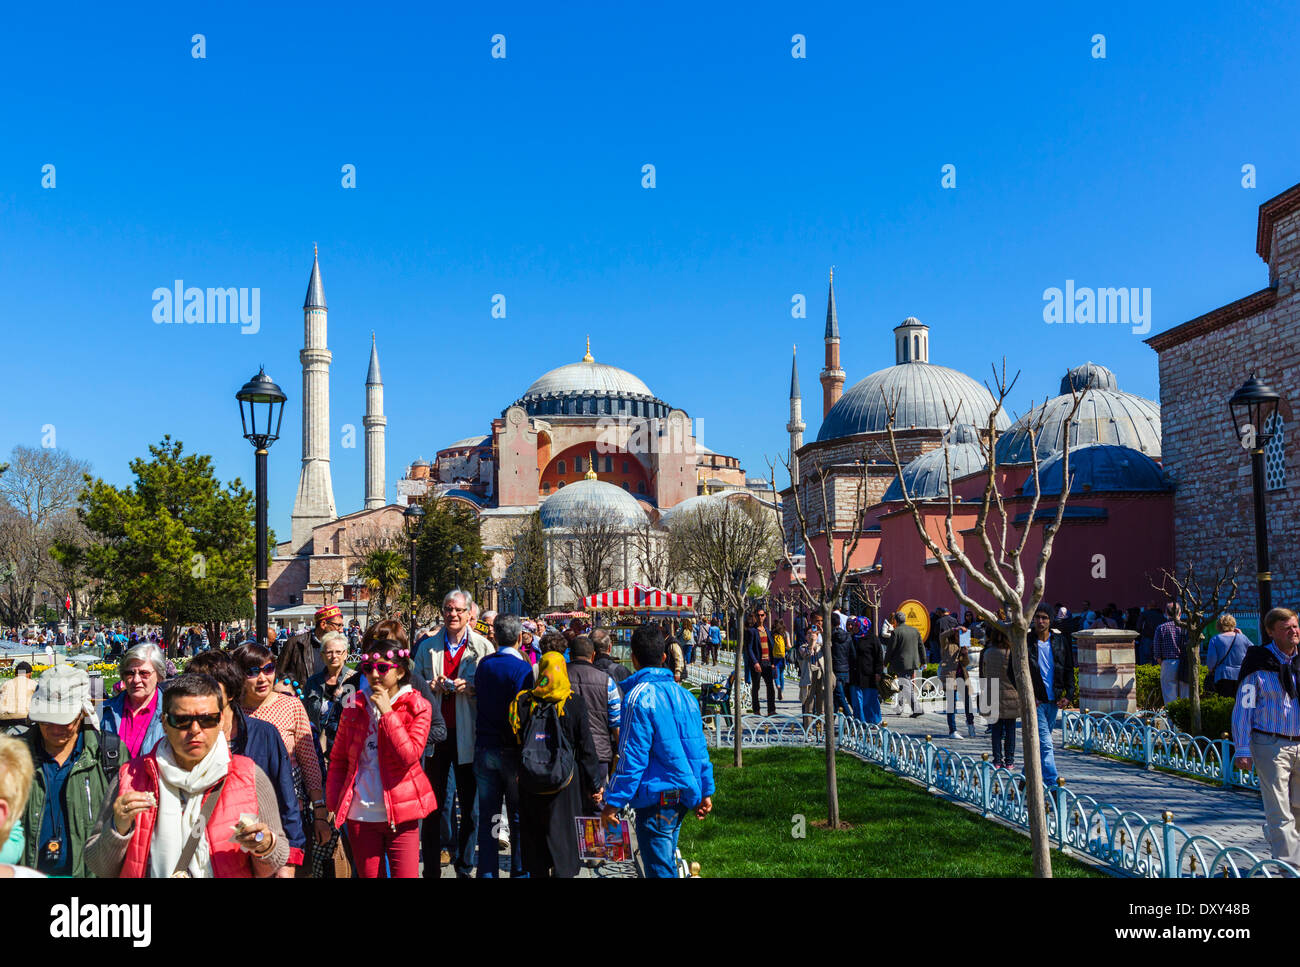 Crowds of tourists in Sultanahmet Park in front of Hagia Sophia (Aya Sofya), Sultanahmet district, Istanbul,Turkey Stock Photo